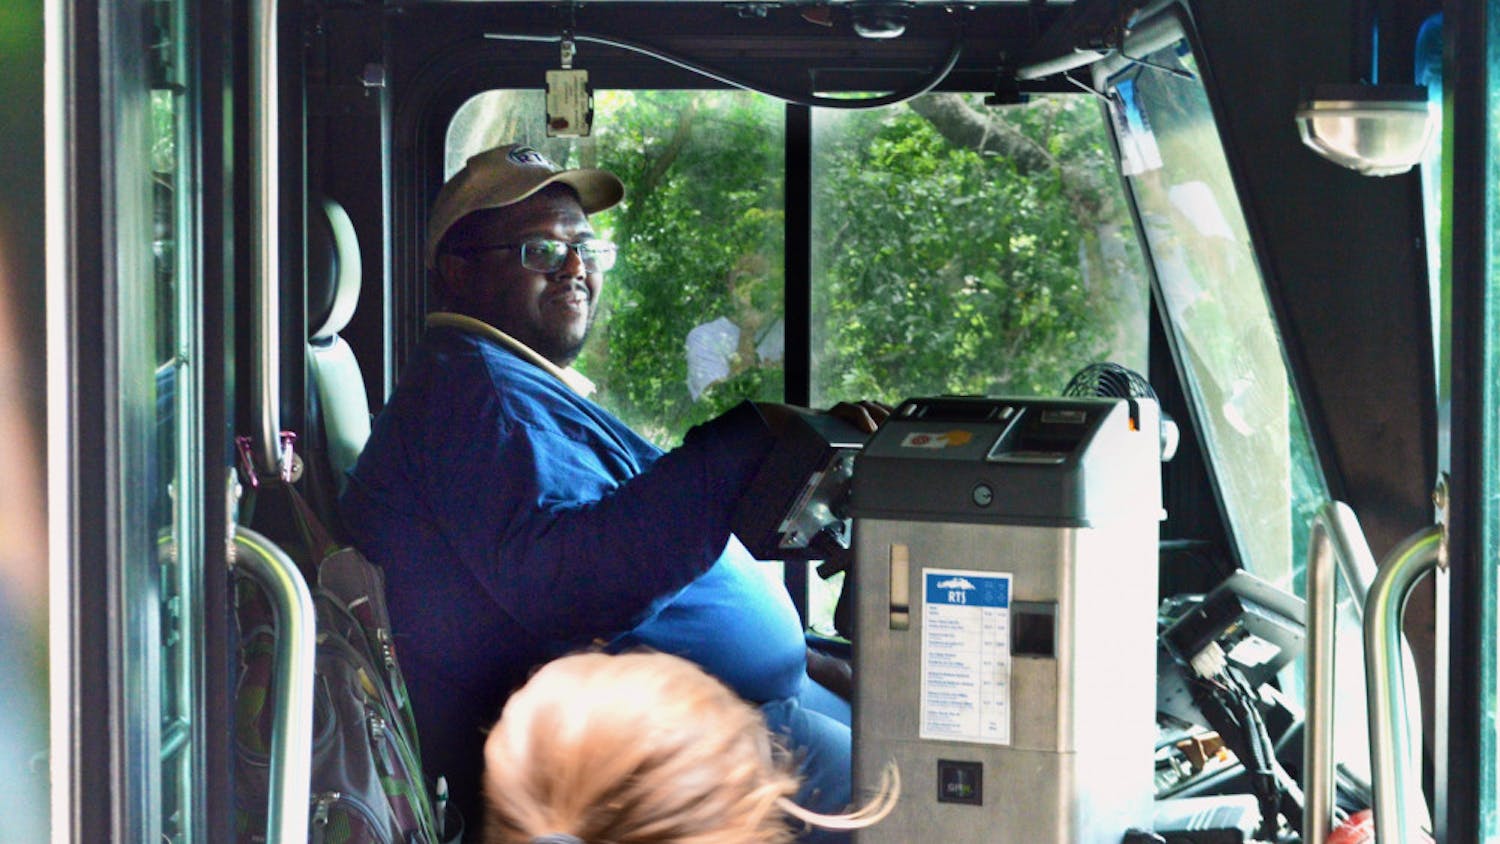 Desmond Grimes, 38, welcomes students onto the 117 Bus at the Reitz Union. Grimes’ route, “Park-N-Ride 2,” circulates through 34th Street back to the Reitz Union.   